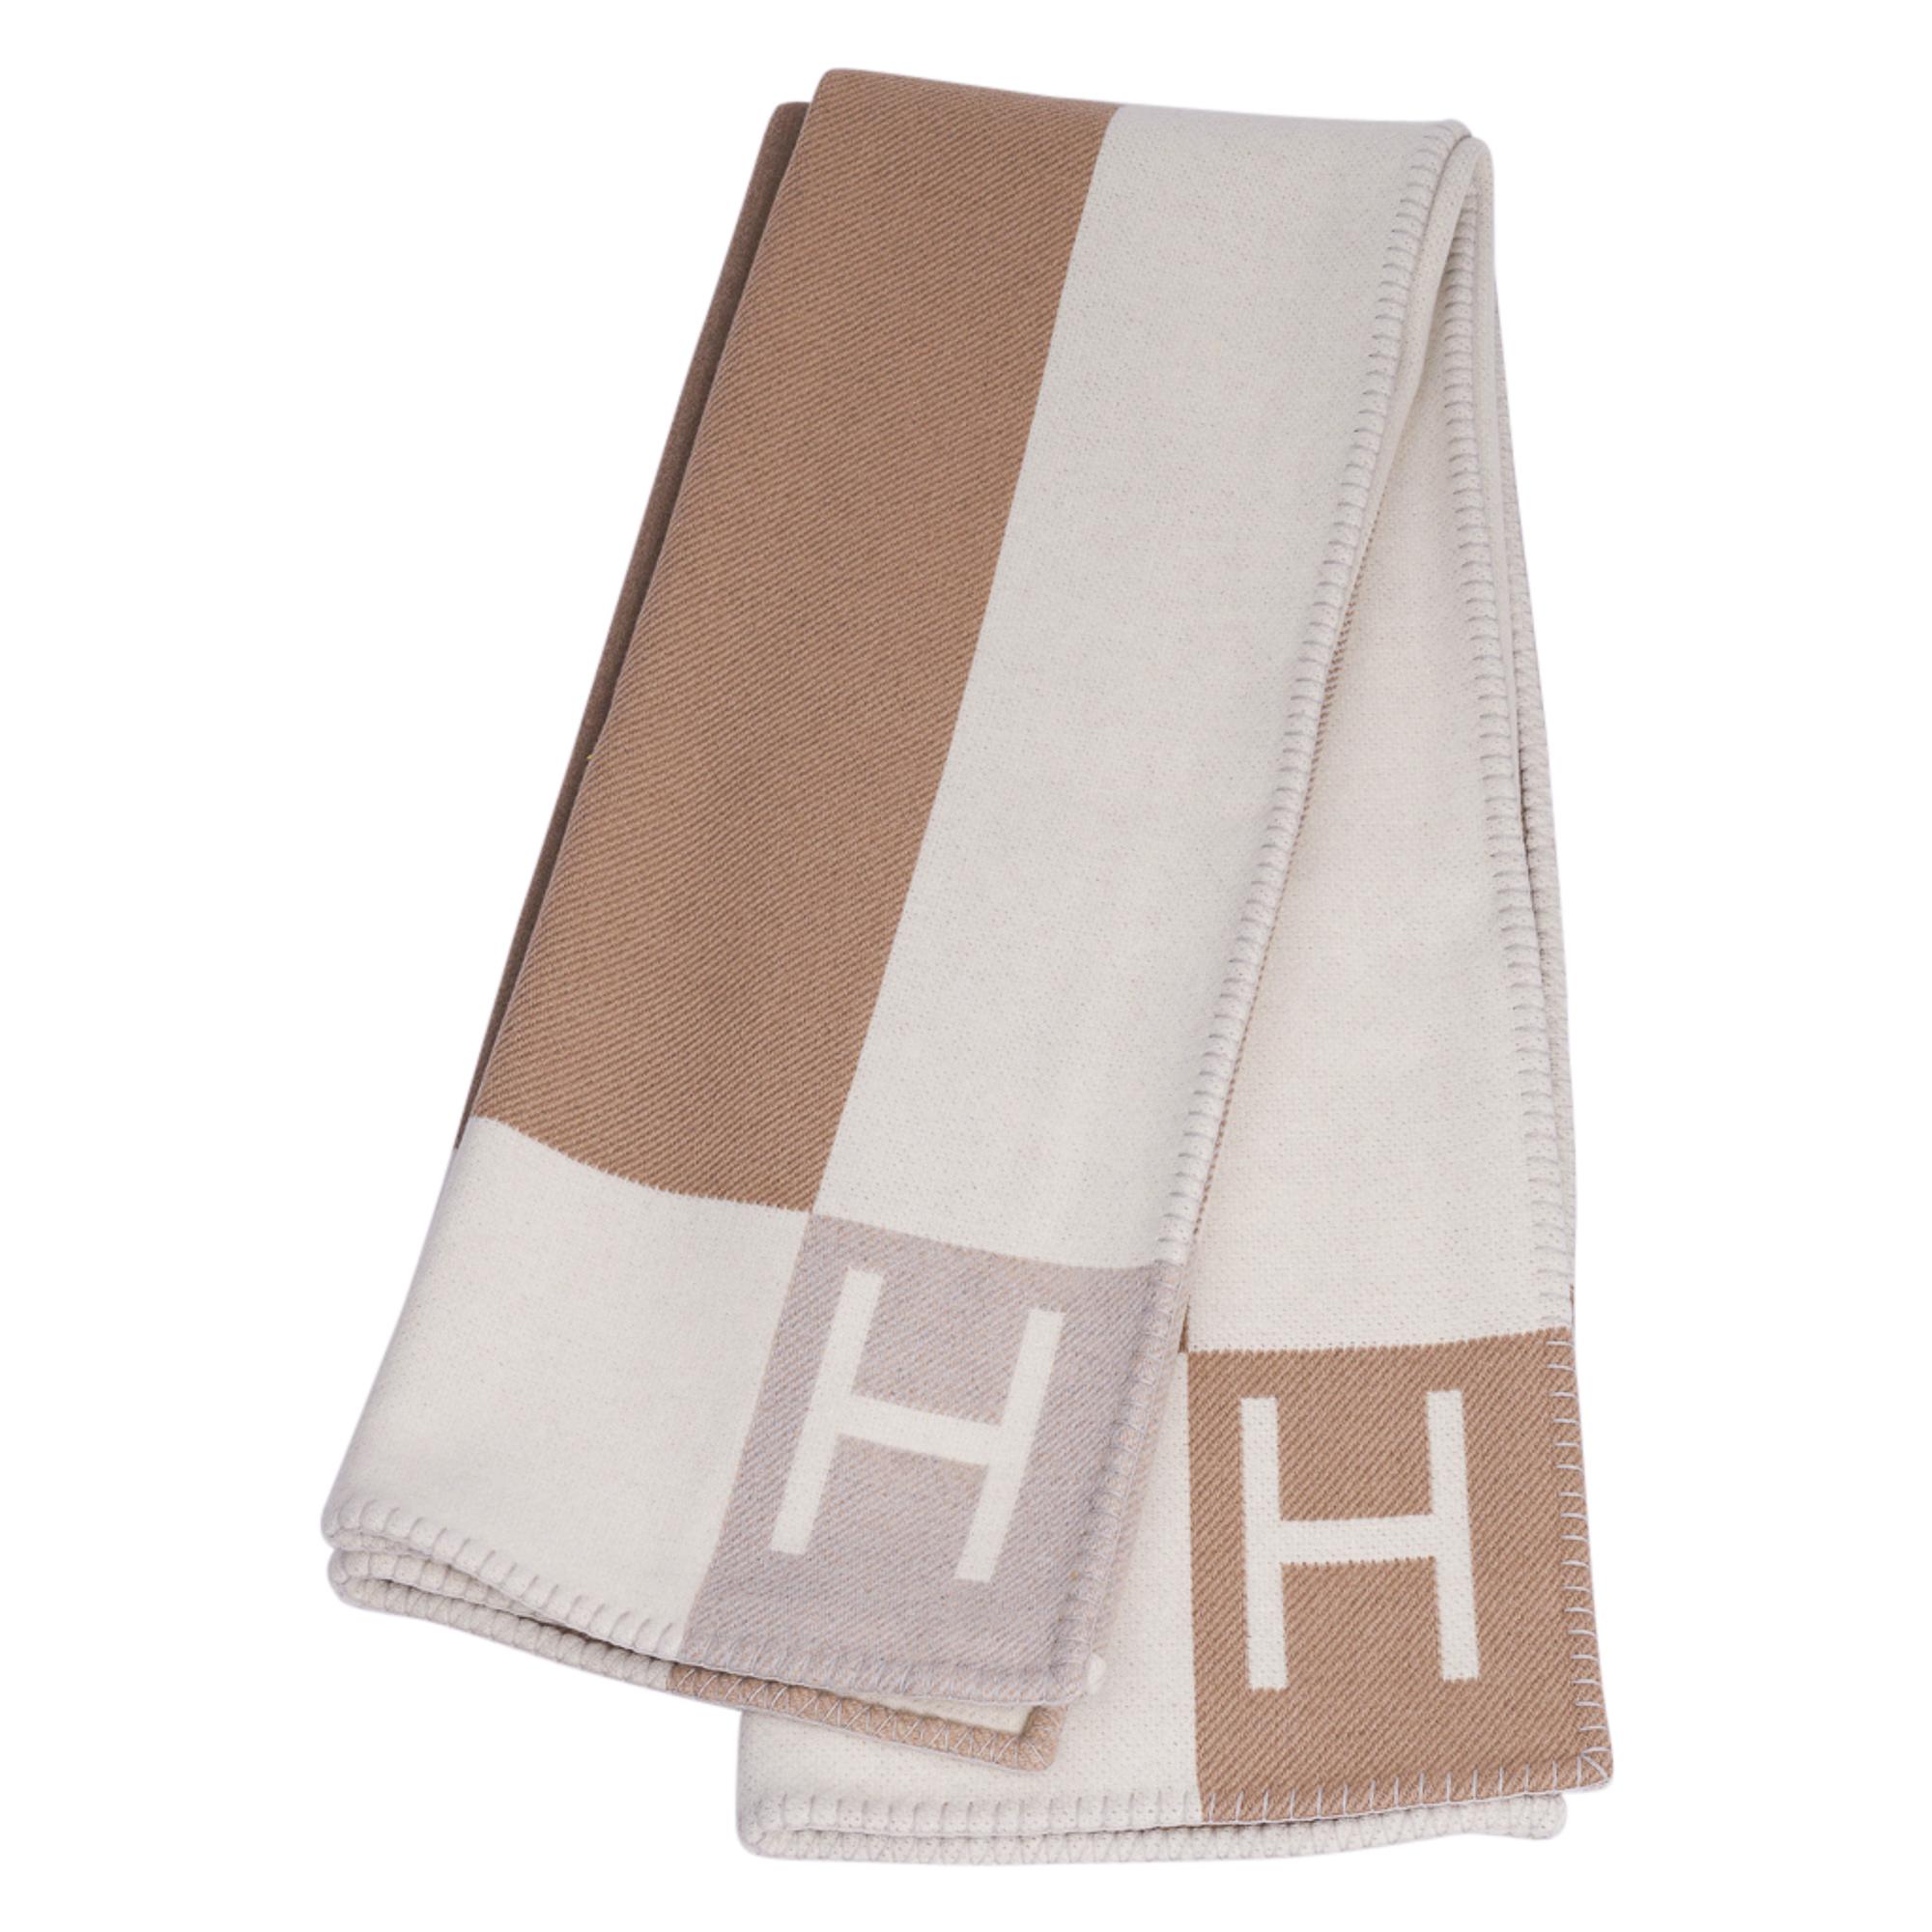 Guaranteed authentic Hermes Avalon Vibration Blanket featured in Ecru Naturel colorway.
Created from 90% Wool and 10% Cashmere this wonderfully warm blanket is a chic addition to any room.
Exquisite fresh modern creation!
New or Pristine Store Fresh